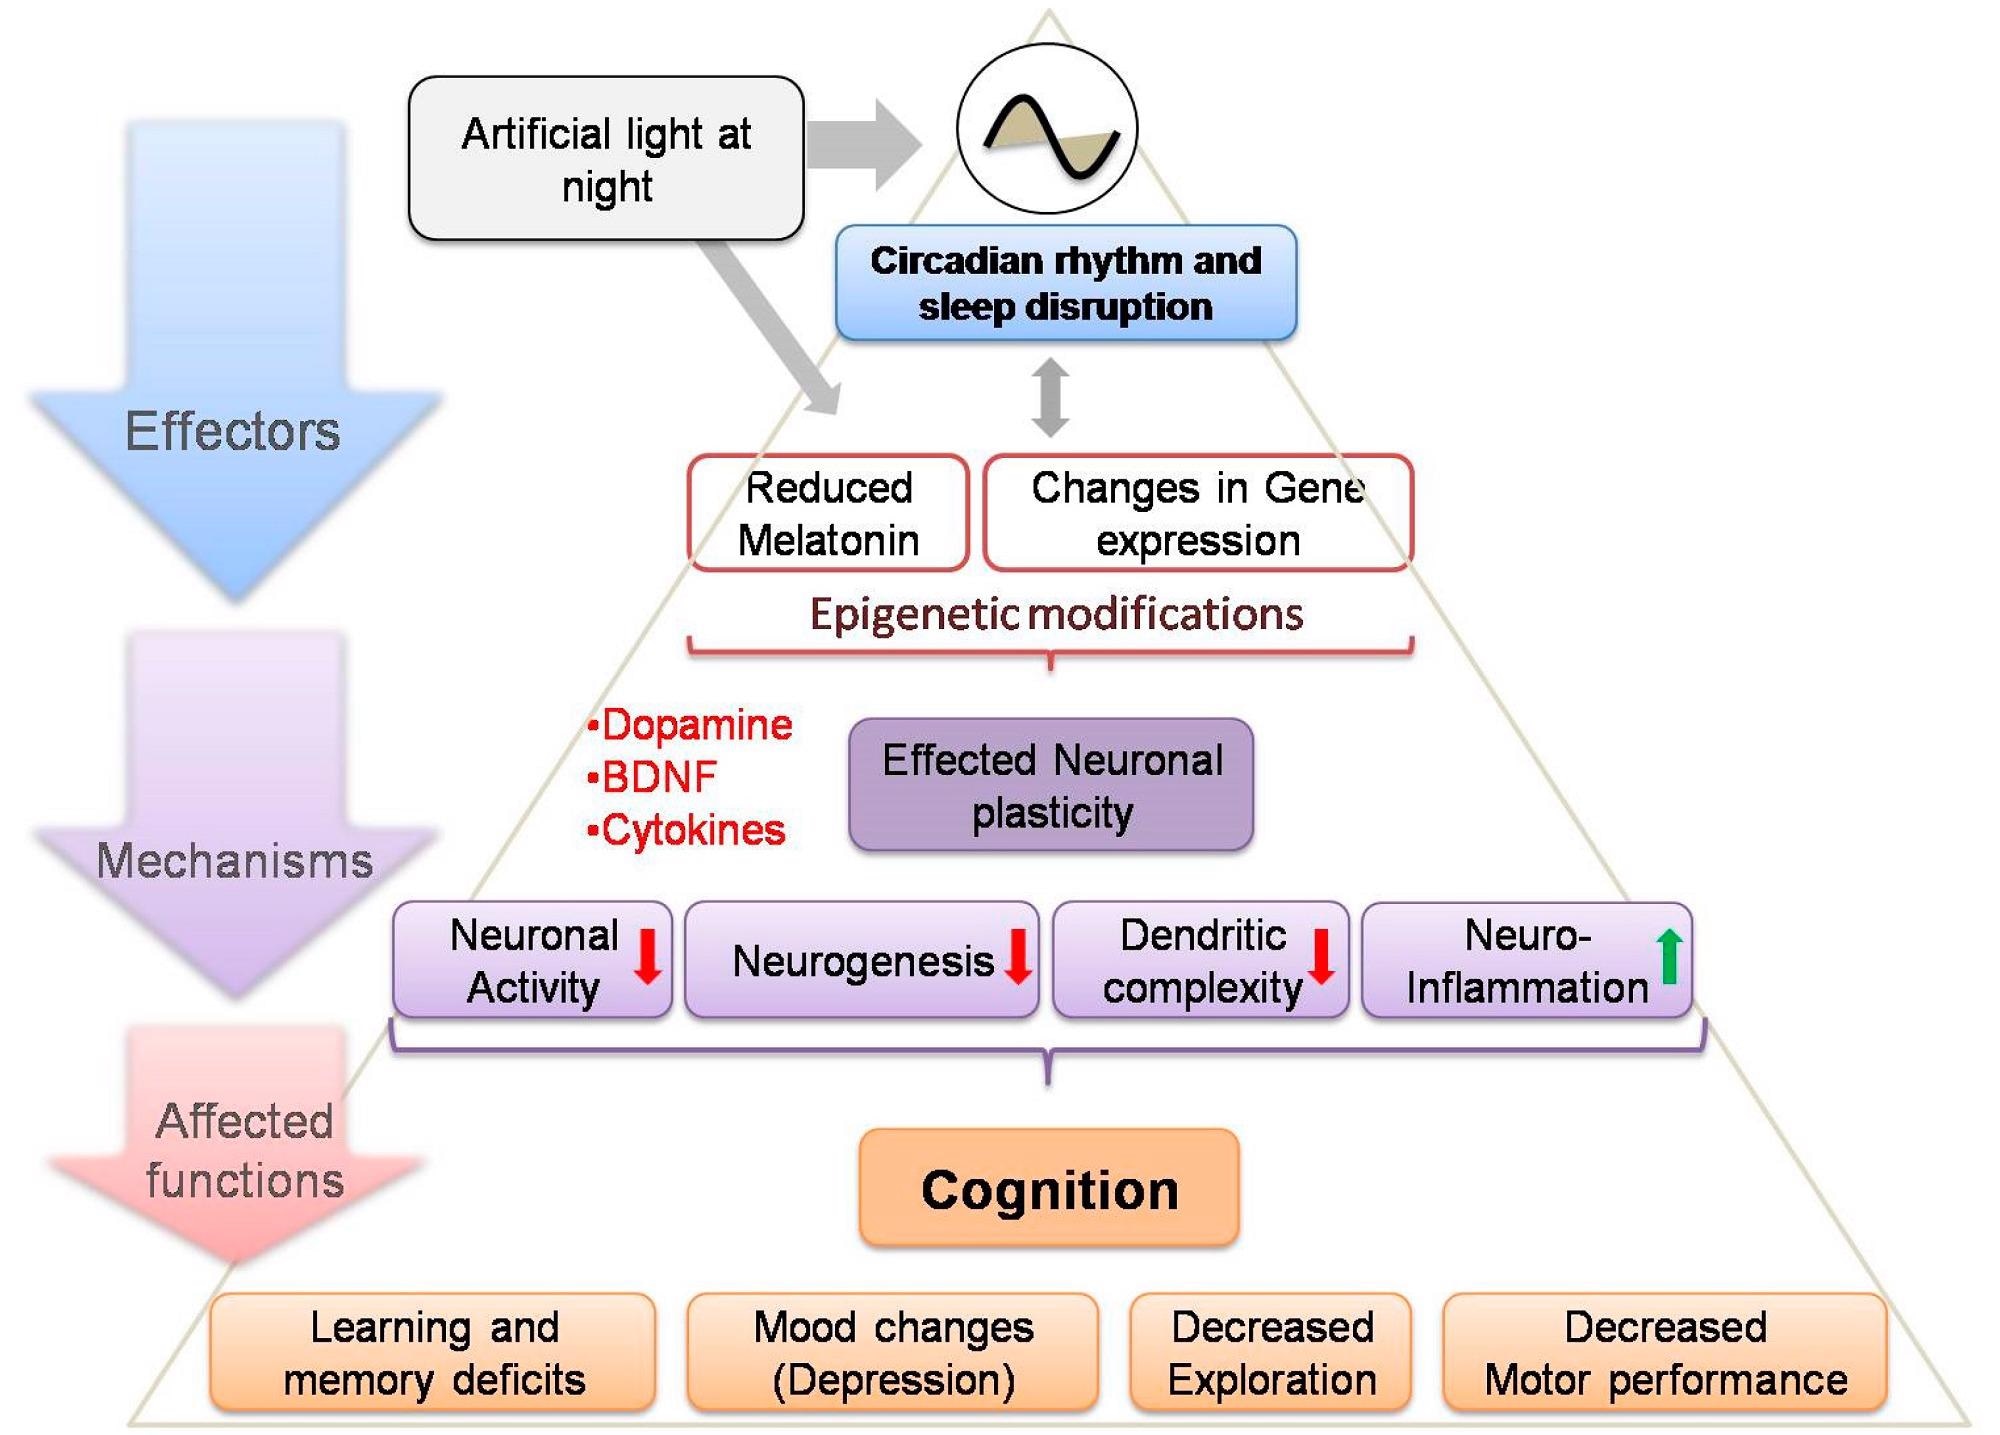 Schematic depicting effect of ALAN exposure, acting on different levels of organization (affecters) via a number of neuronal pathways (mechanisms), those resulting in a series of adverse effects on brain functions (affected functions). This model may help us to understand the complexity of the relationships among exposure components in a systematic manner and may help in assessing the impact on brain functions of ALAN exposure outcomes and their underlying mechanisms (red and green arrows indicate decreased and increased functions, respectively). BDNF: Brain-derived neurotropic factor.